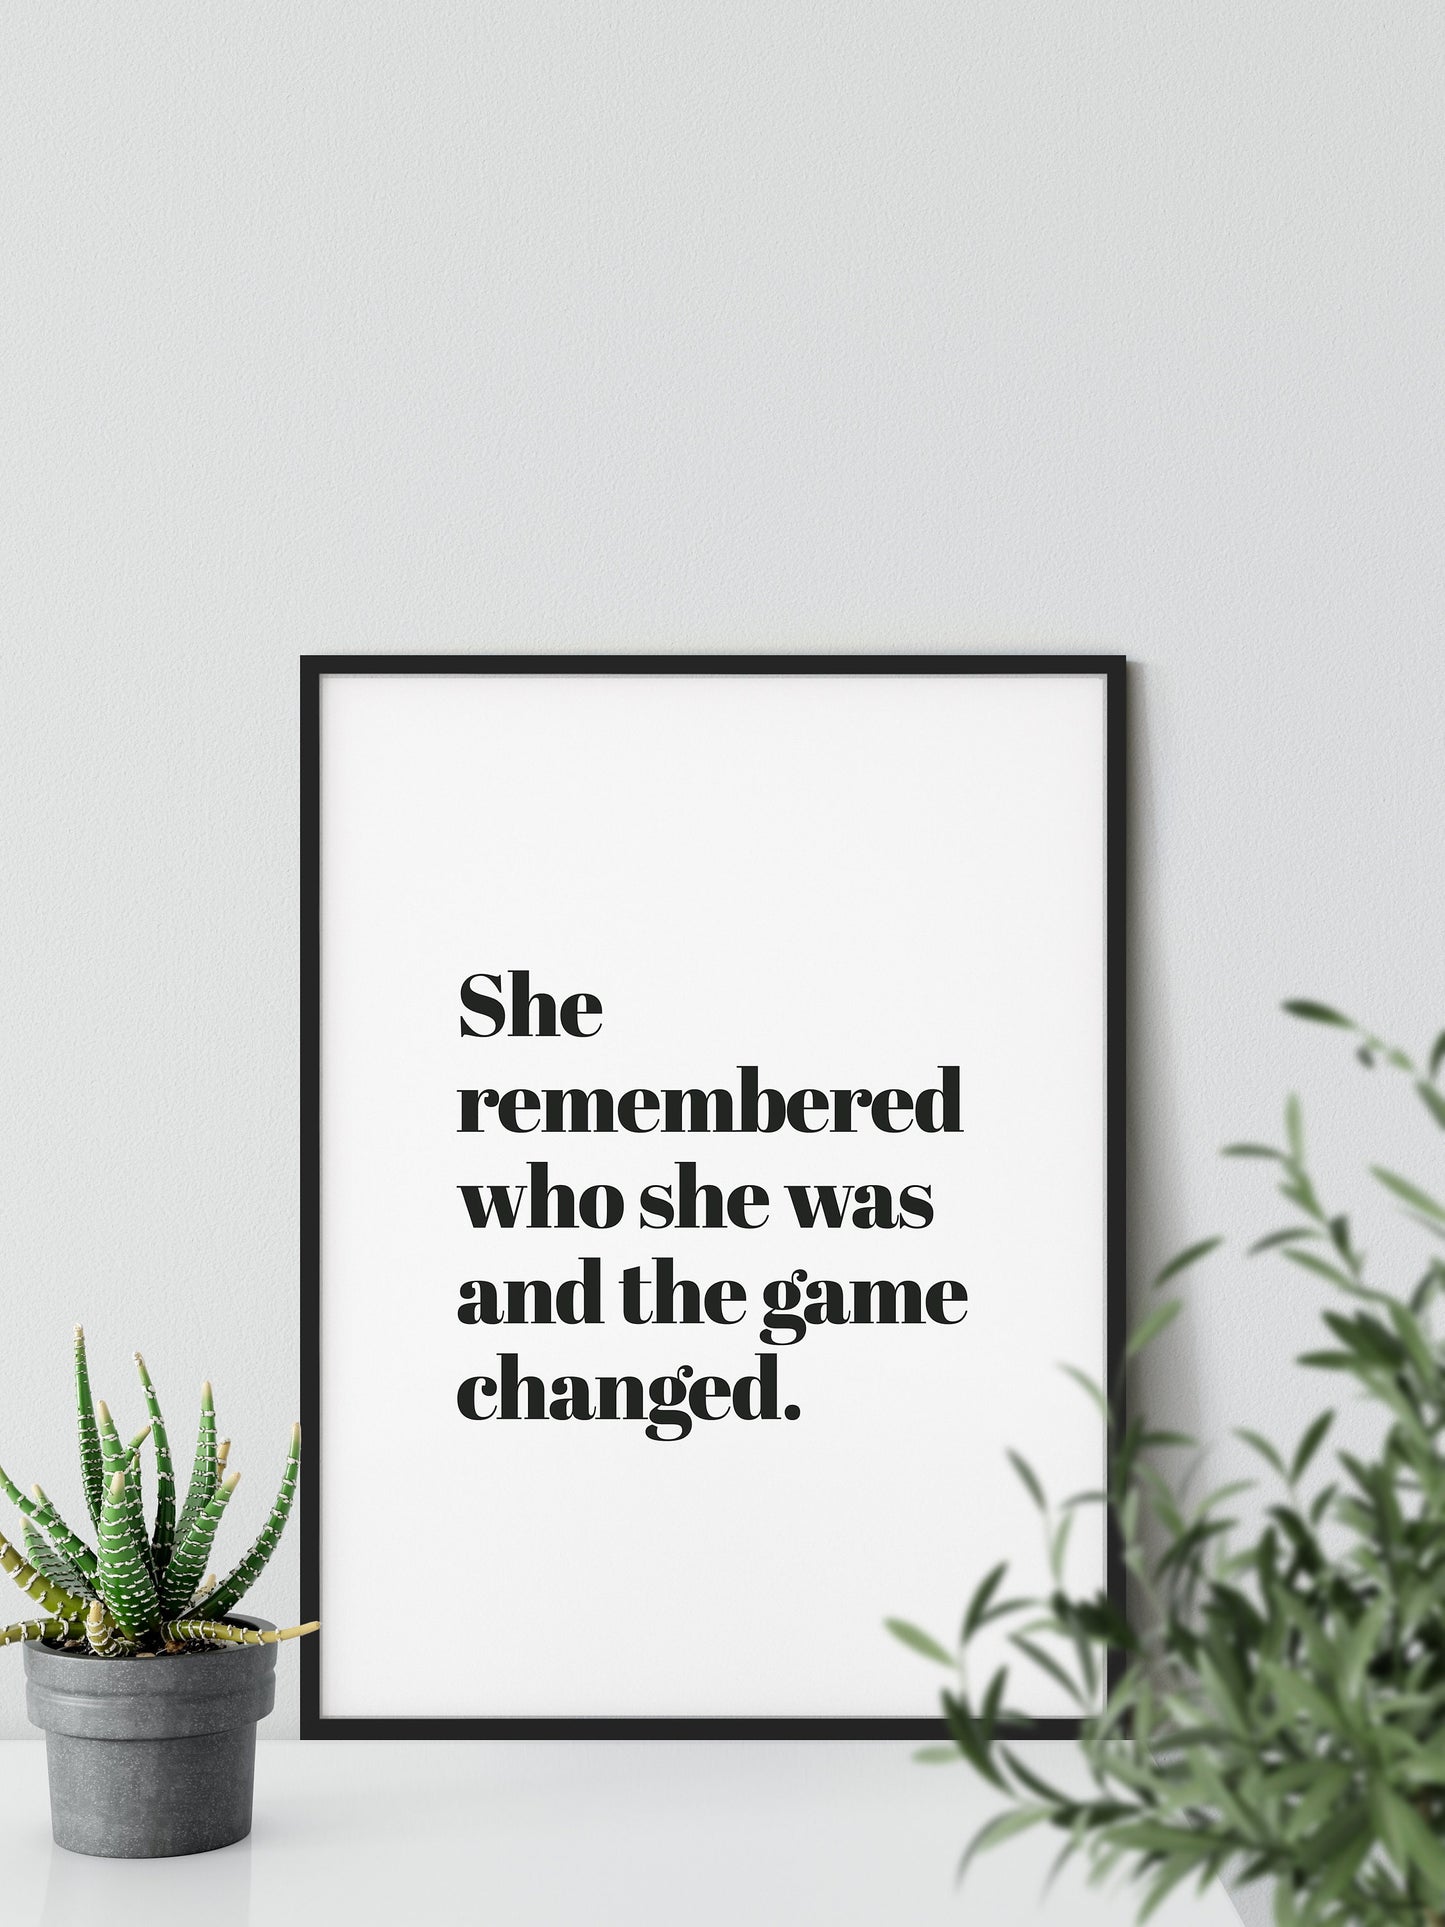 She remembered who she was and the game changed Poster with Saying, Motivation Poster, Inspirational Quote Poster, Office Poster, Girl Power